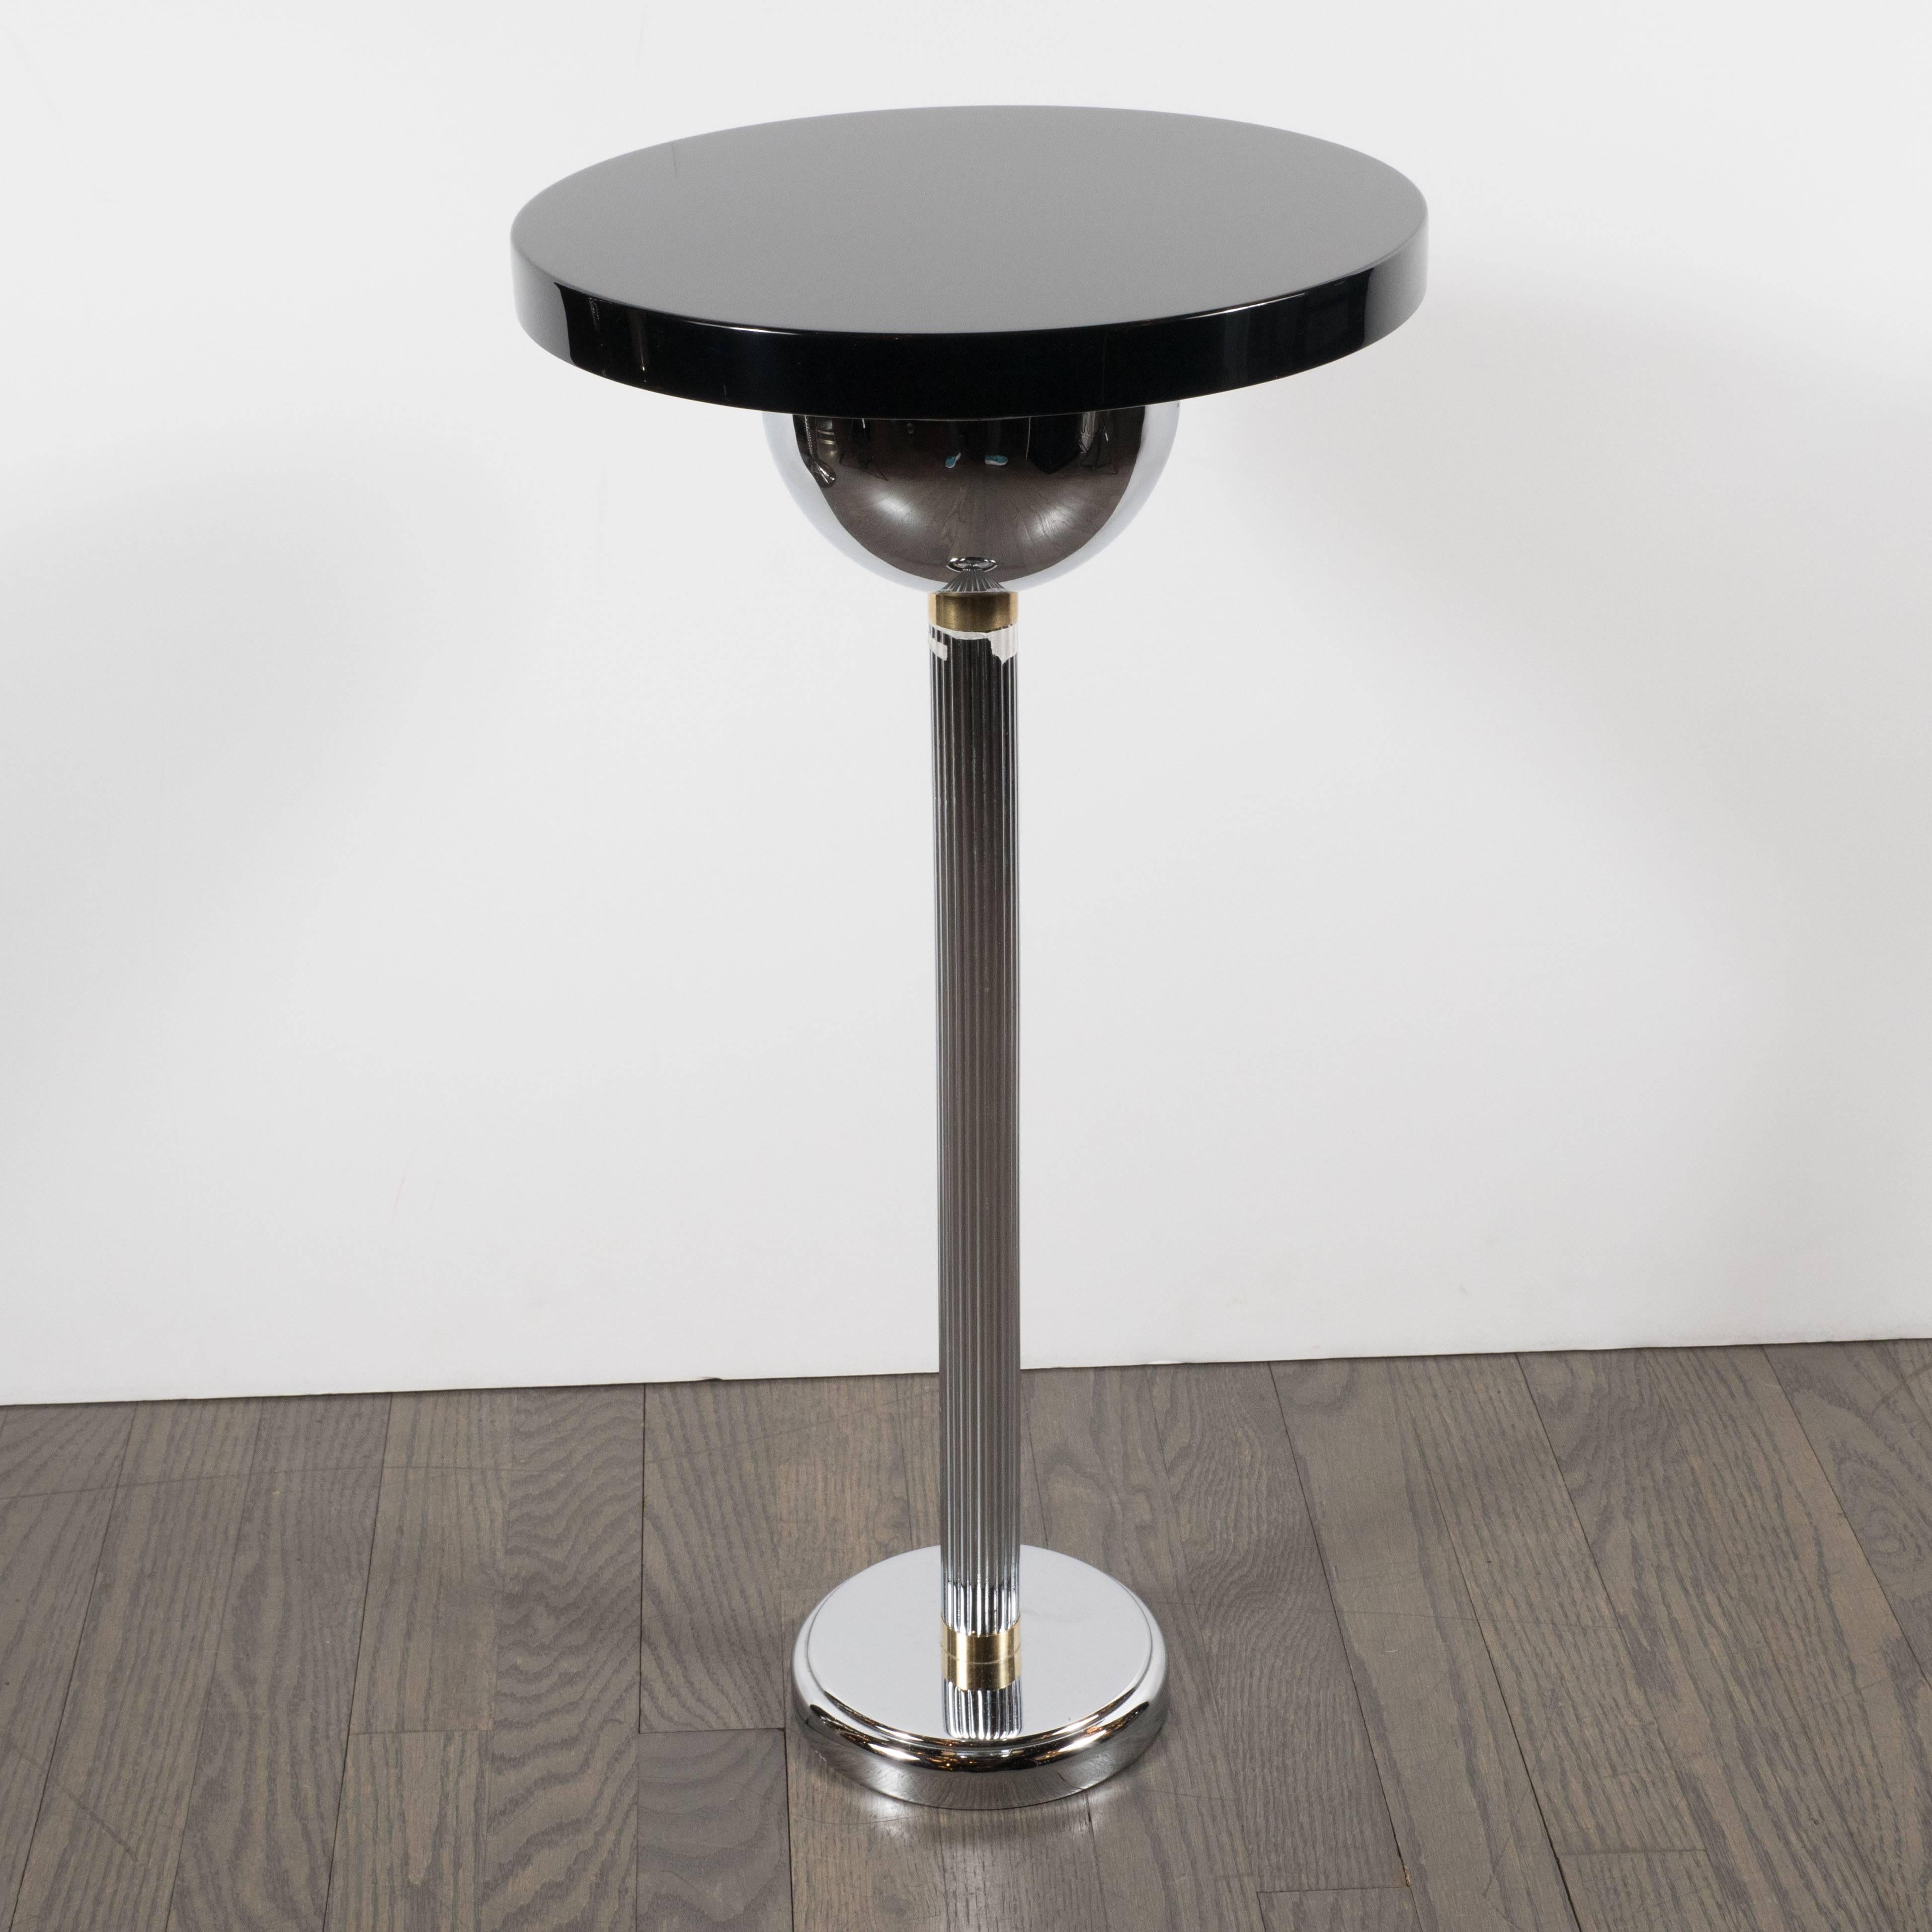 This refined Art Deco Machine Age Drinks table represents the unadorned elegance of great design at its essence. It features a lustrous black lacquer top supported by an inverted dome form, a reeded chrome columnar stem and a skyscraper style base